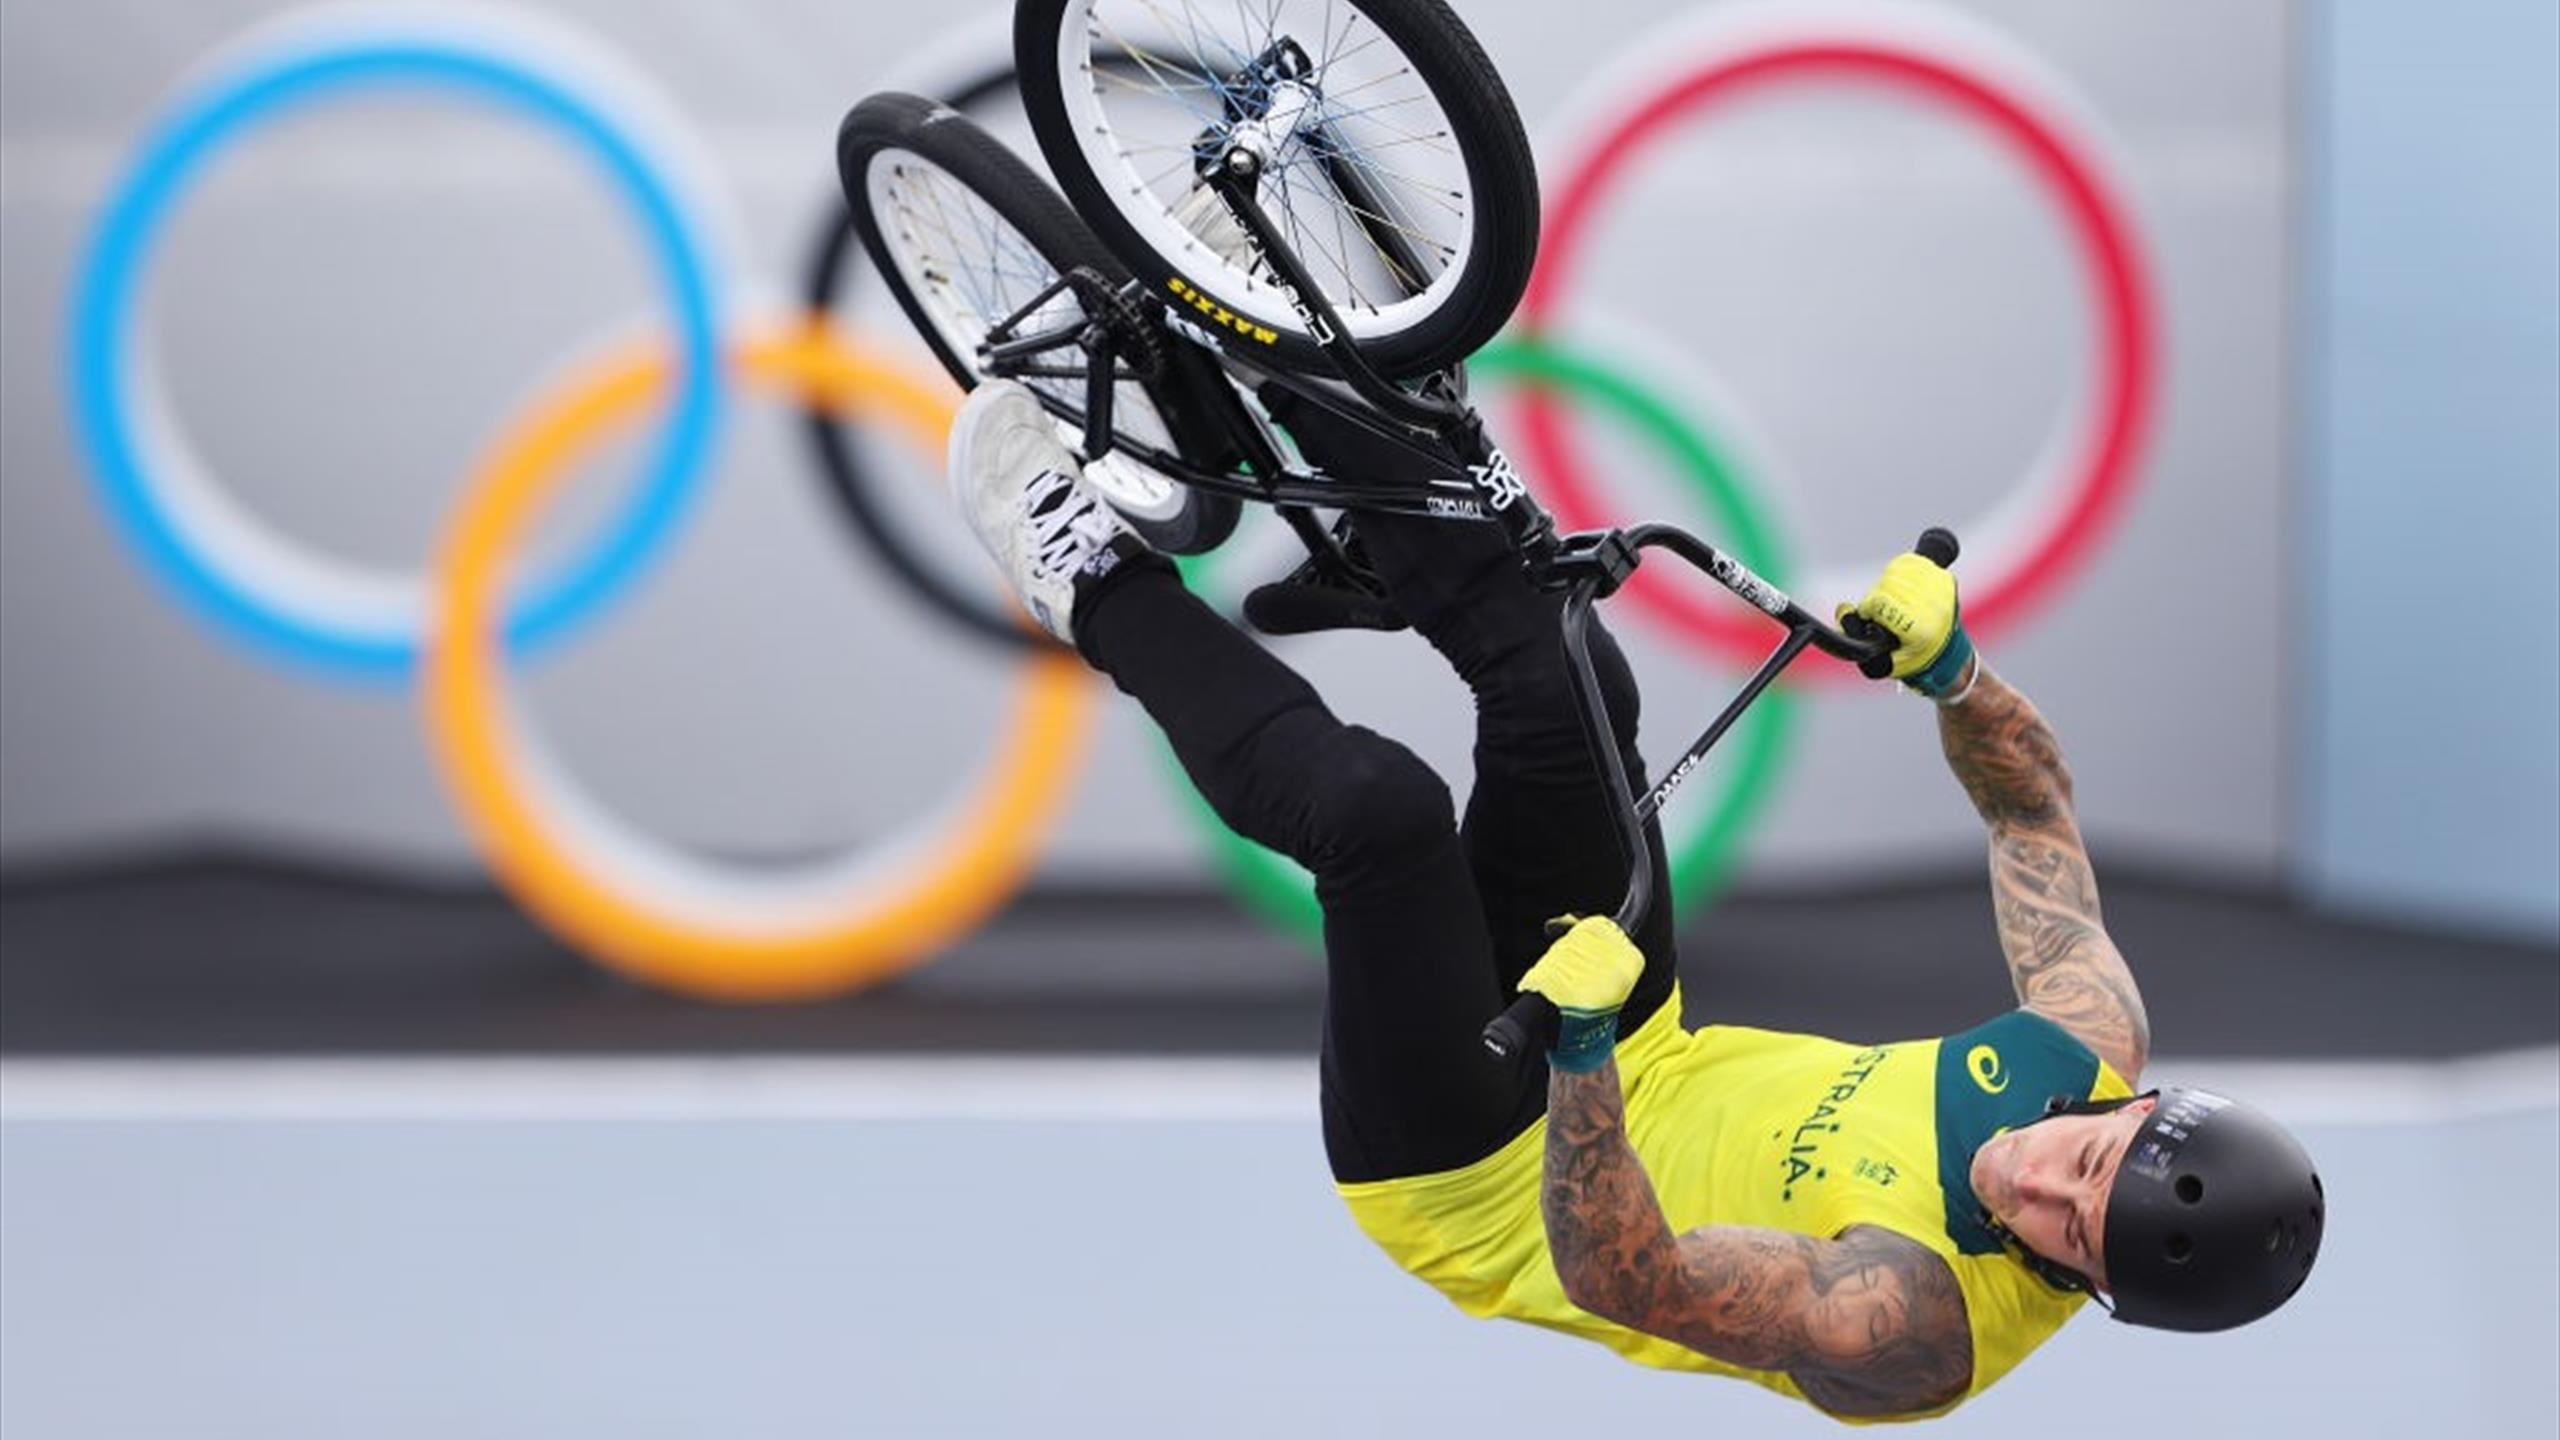 BMX (Sports): Logan Martin At The Olympics Freestyle BMX Debut, Trick On The Two Wheels Of A Bike, Japan, 2020-2021. 2560x1440 HD Background.